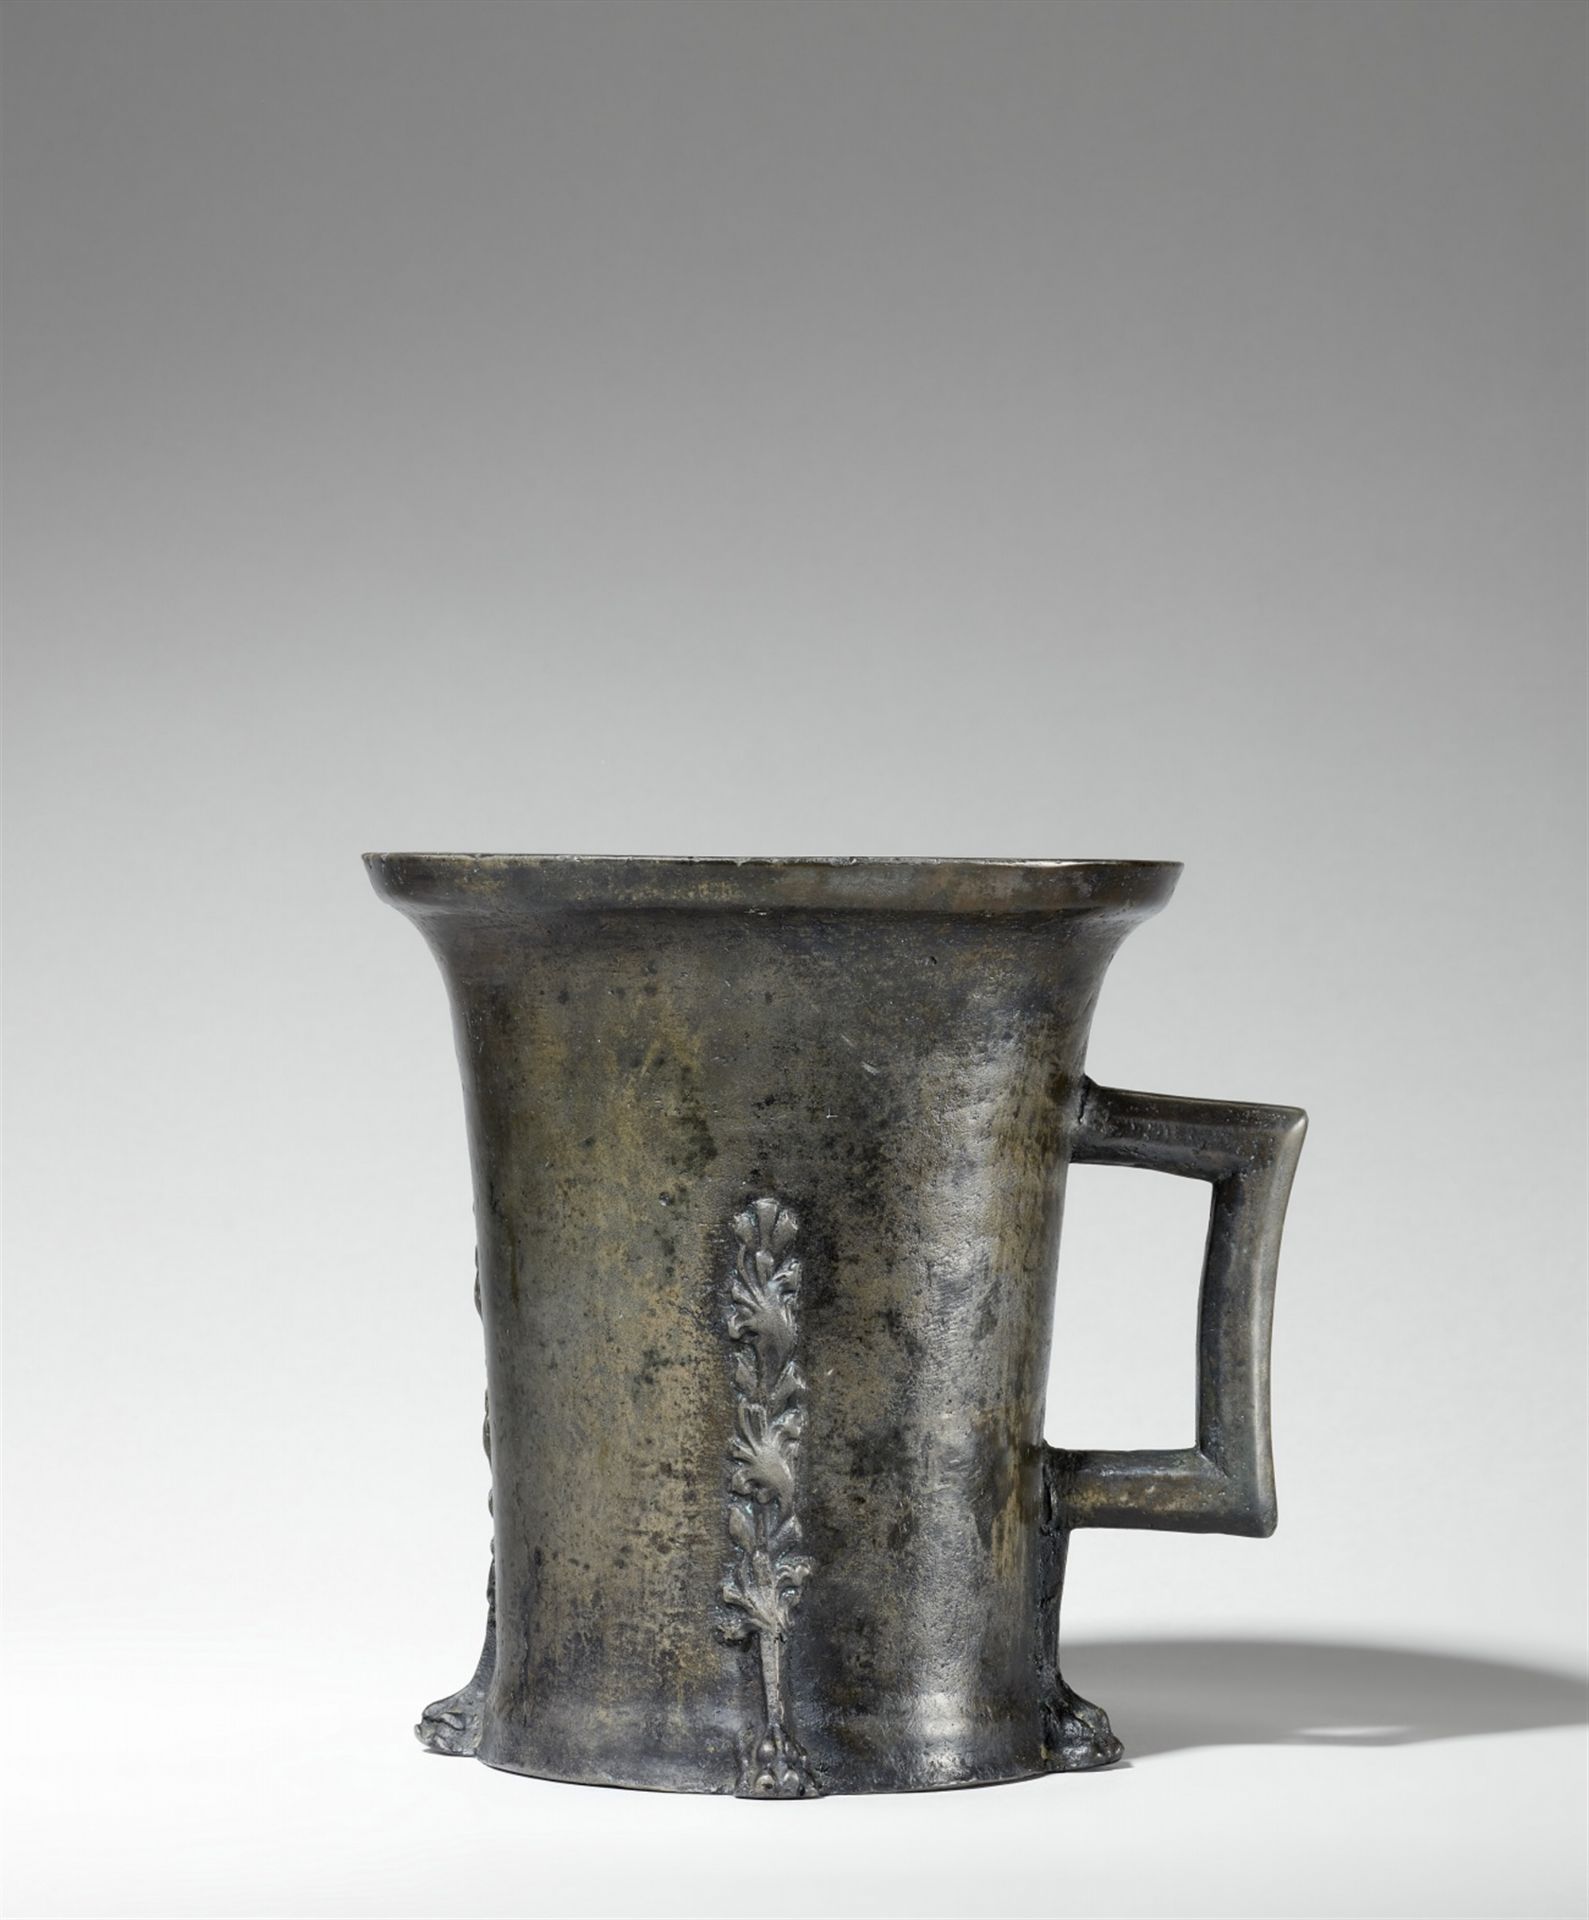 A magnificent South German single-handled mortar with tendril motifs